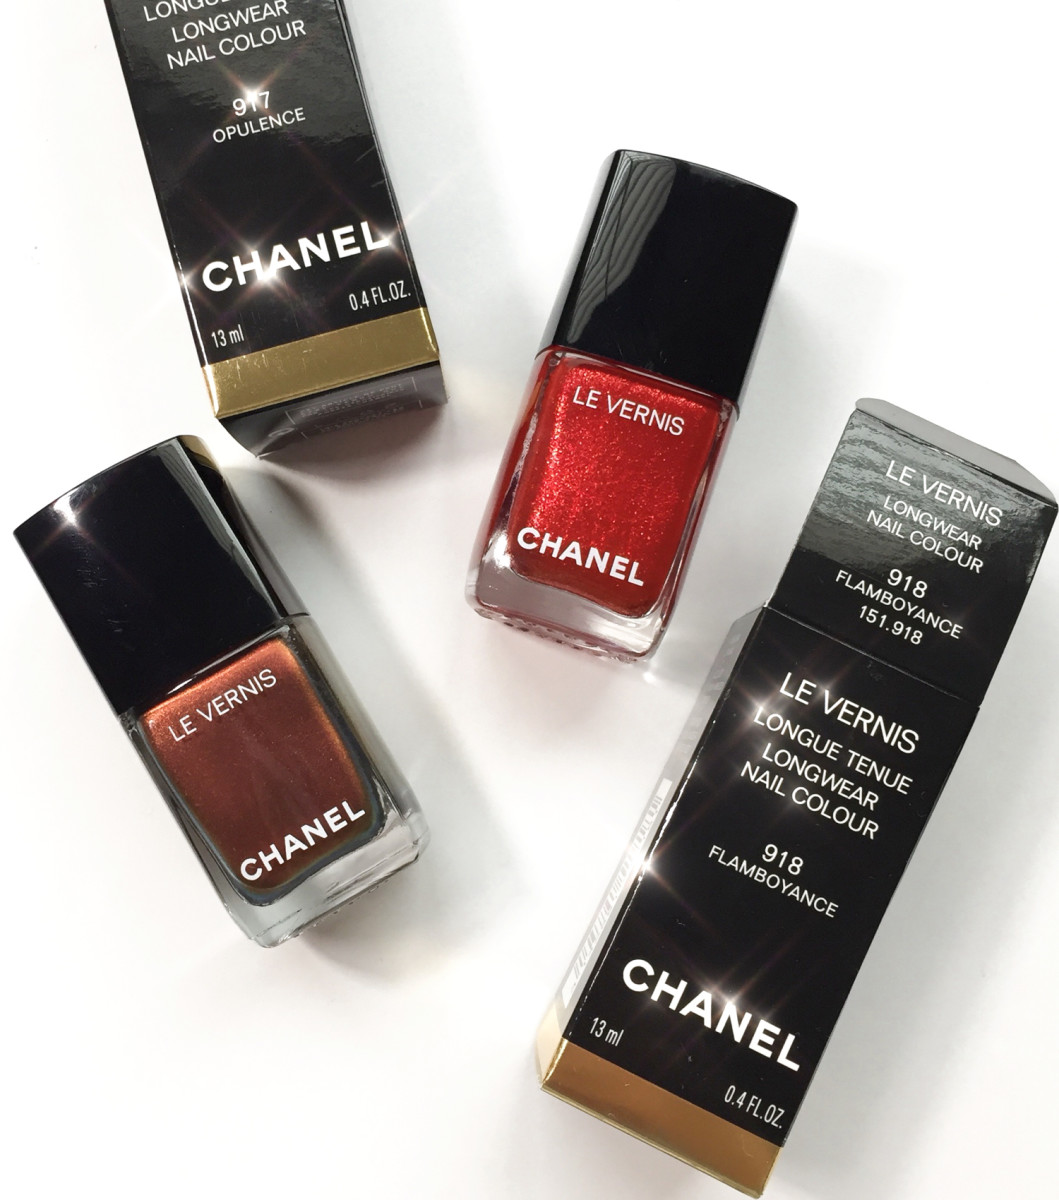 CHANEL HOLIDAY 2018 COLLECTION LIBRE VERNIS Beautygeeks